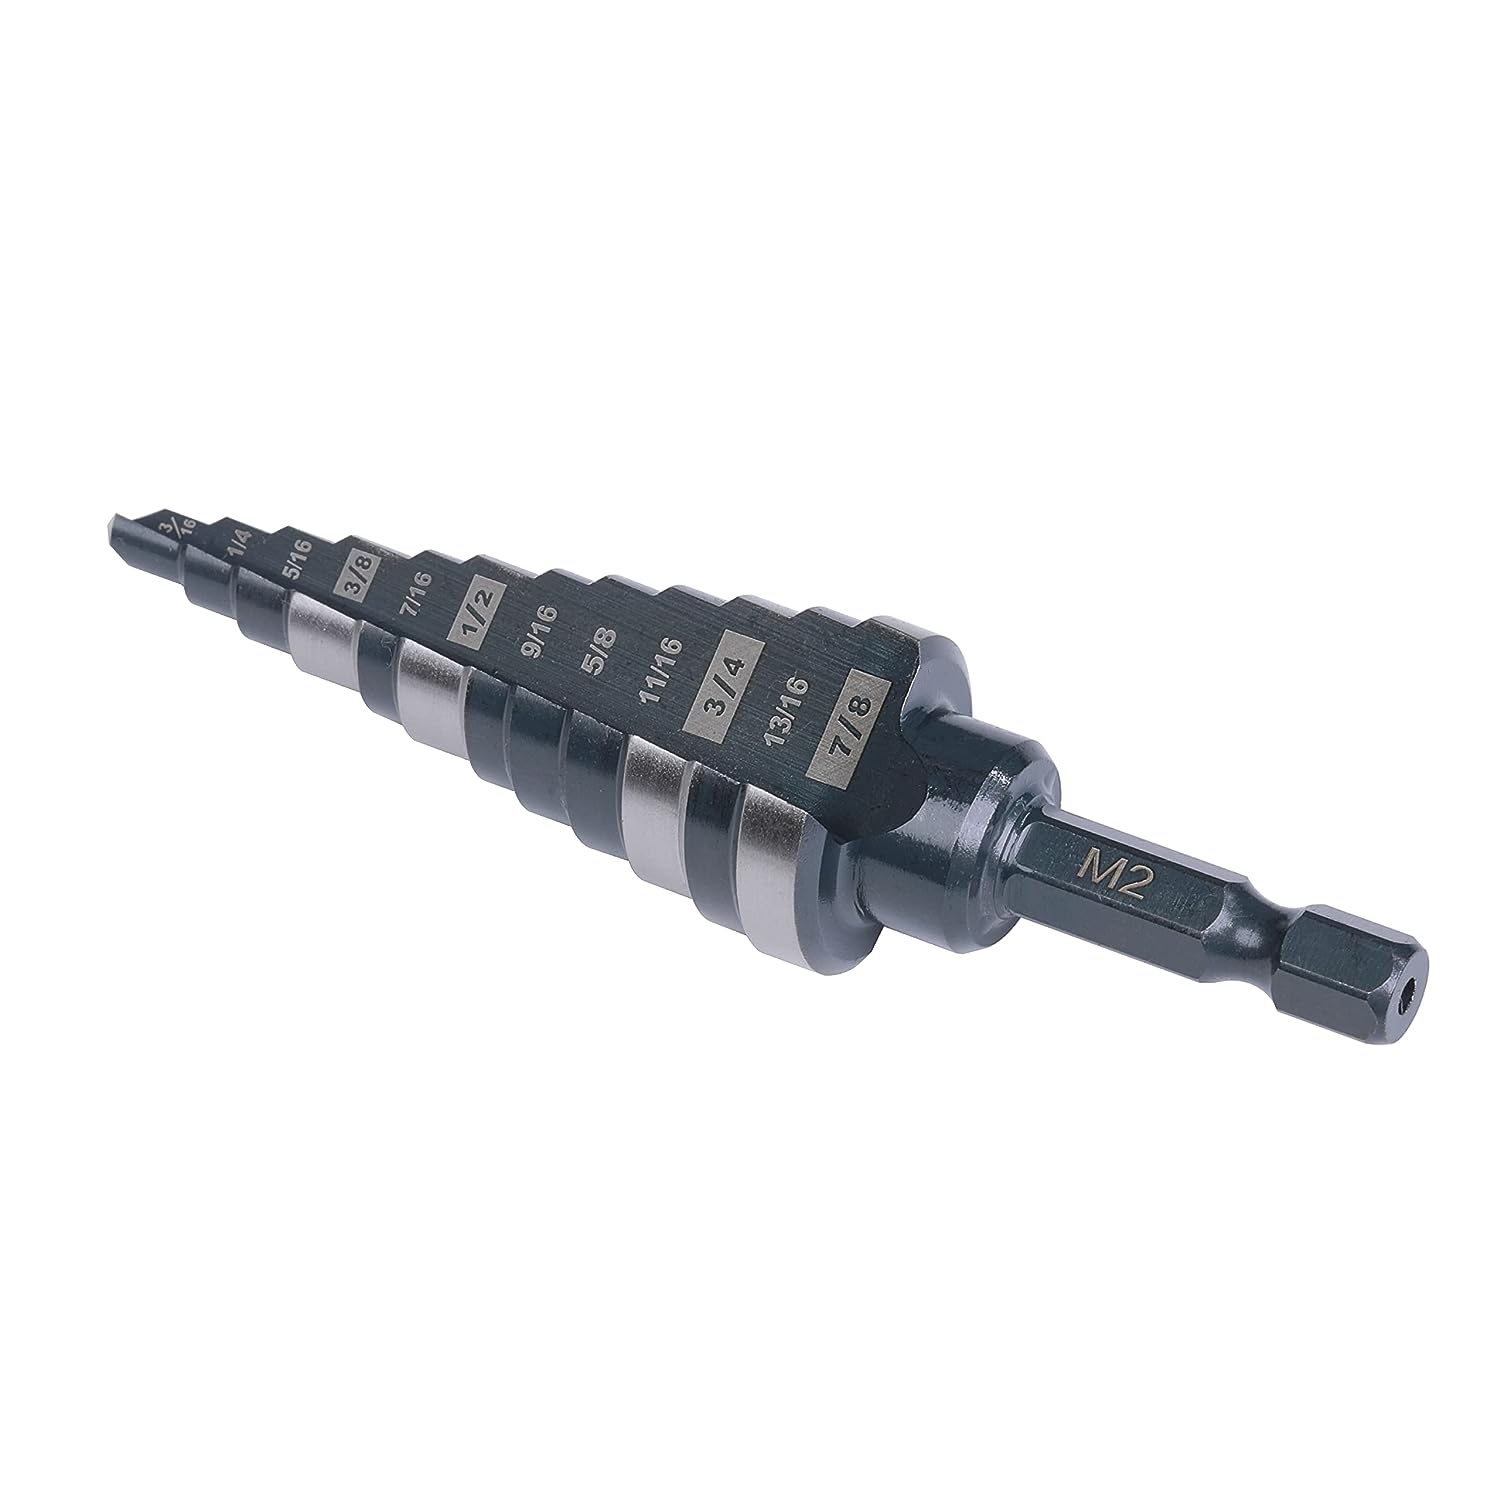 Jerax tools Quick Change Step Drill Bit Double Fluted [...]